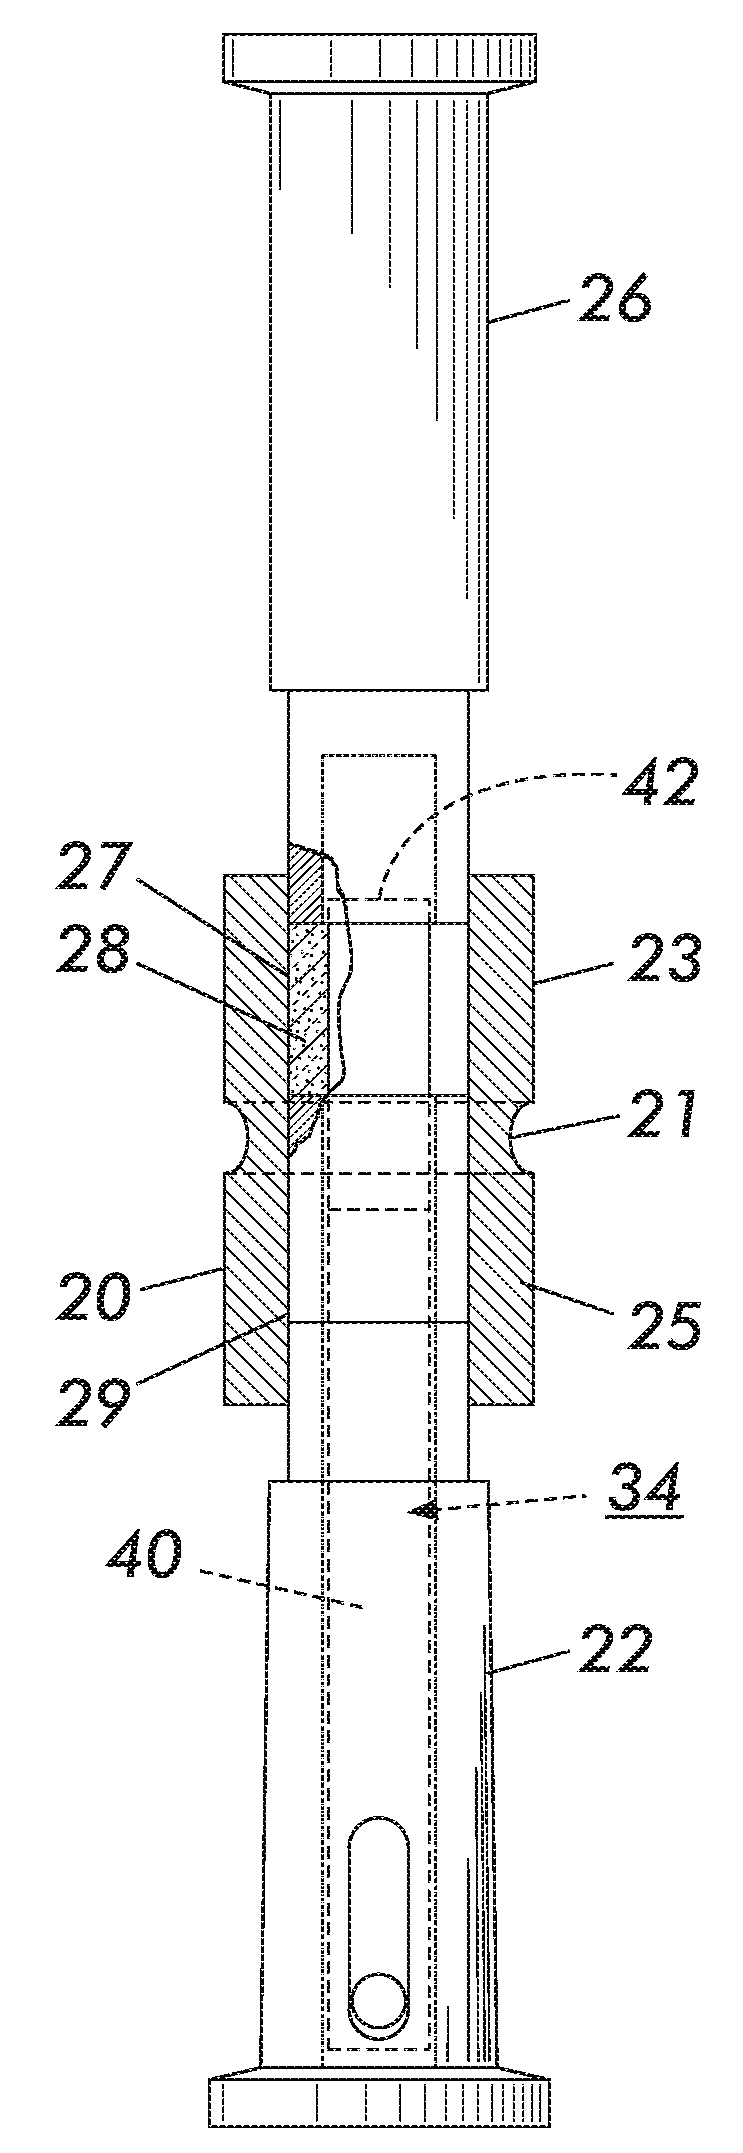 Ceramic center pin for compaction tooling and method for making same